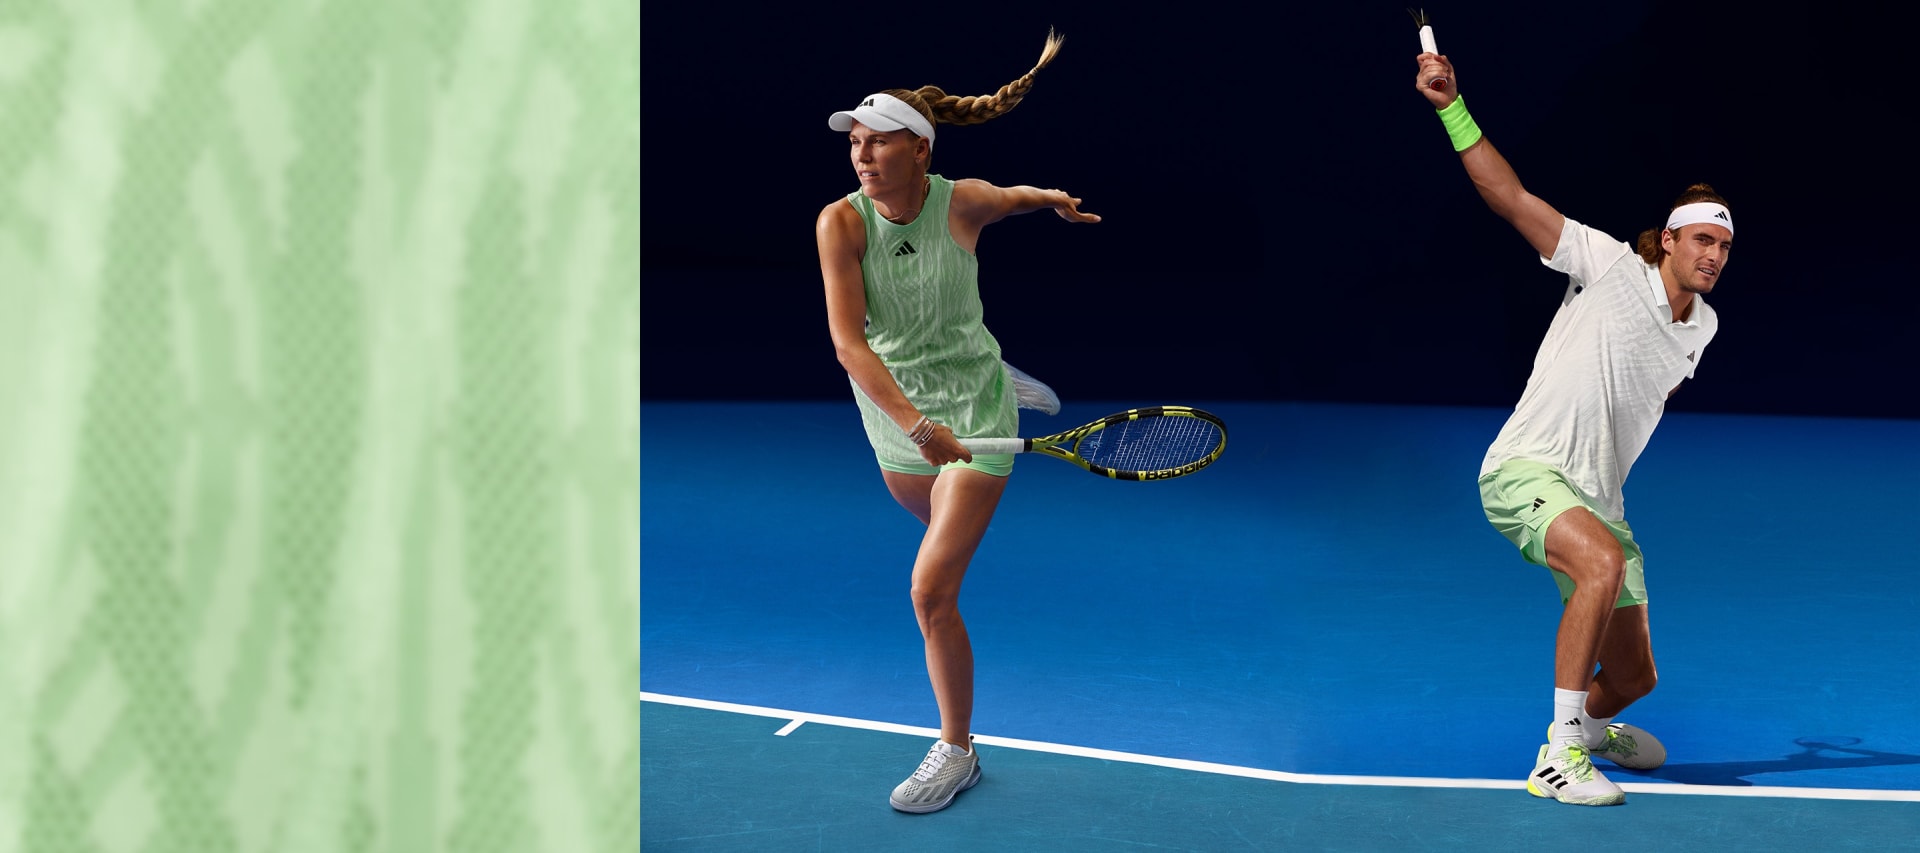 Caroline Wozniacki and Stéfanos Tsitsipás playing tennis in the new Melbourne collection.